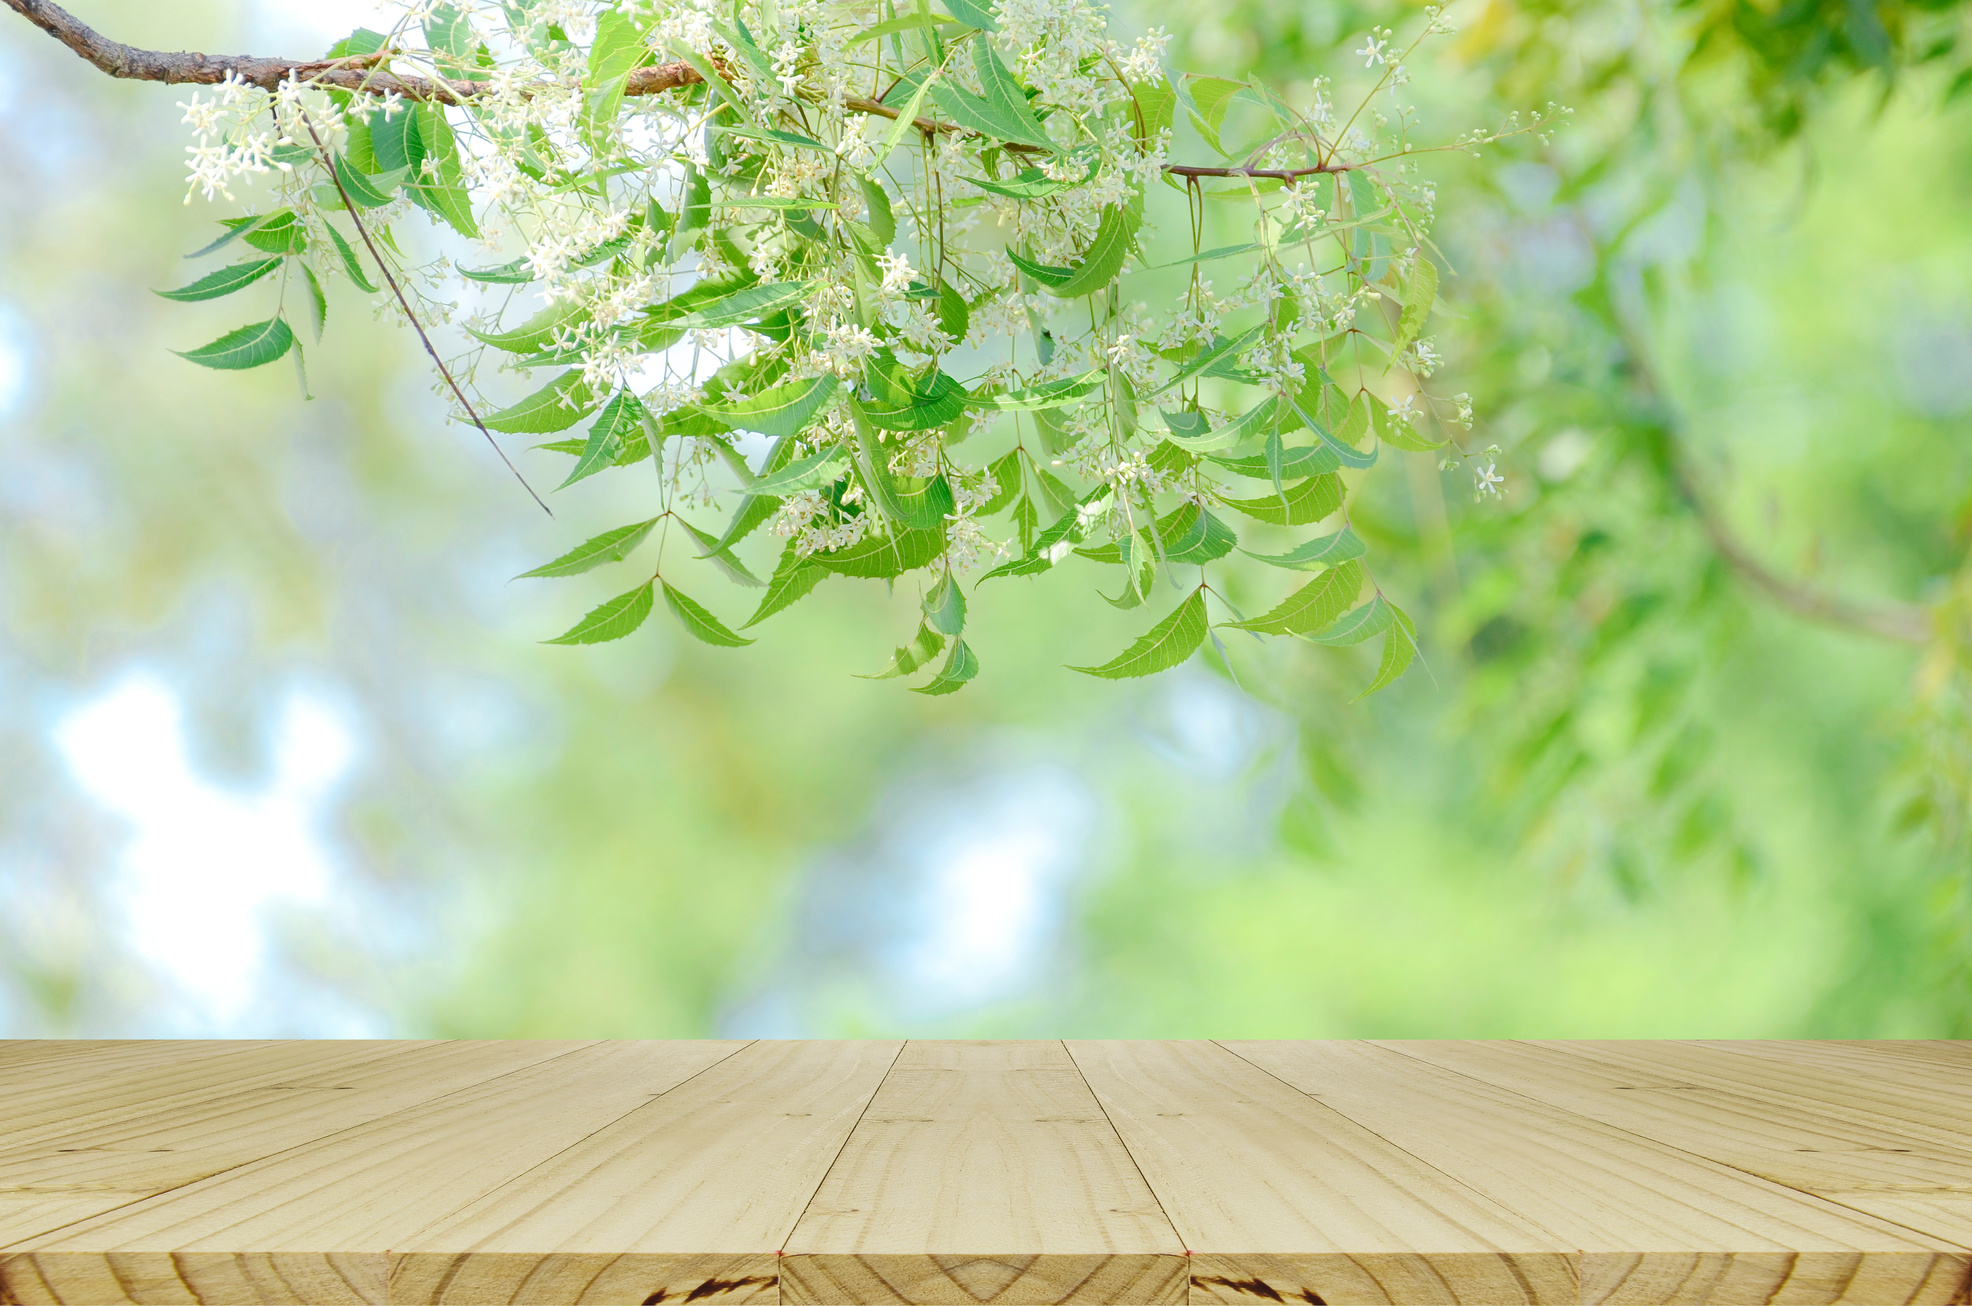 Perspective wood table and nature background.